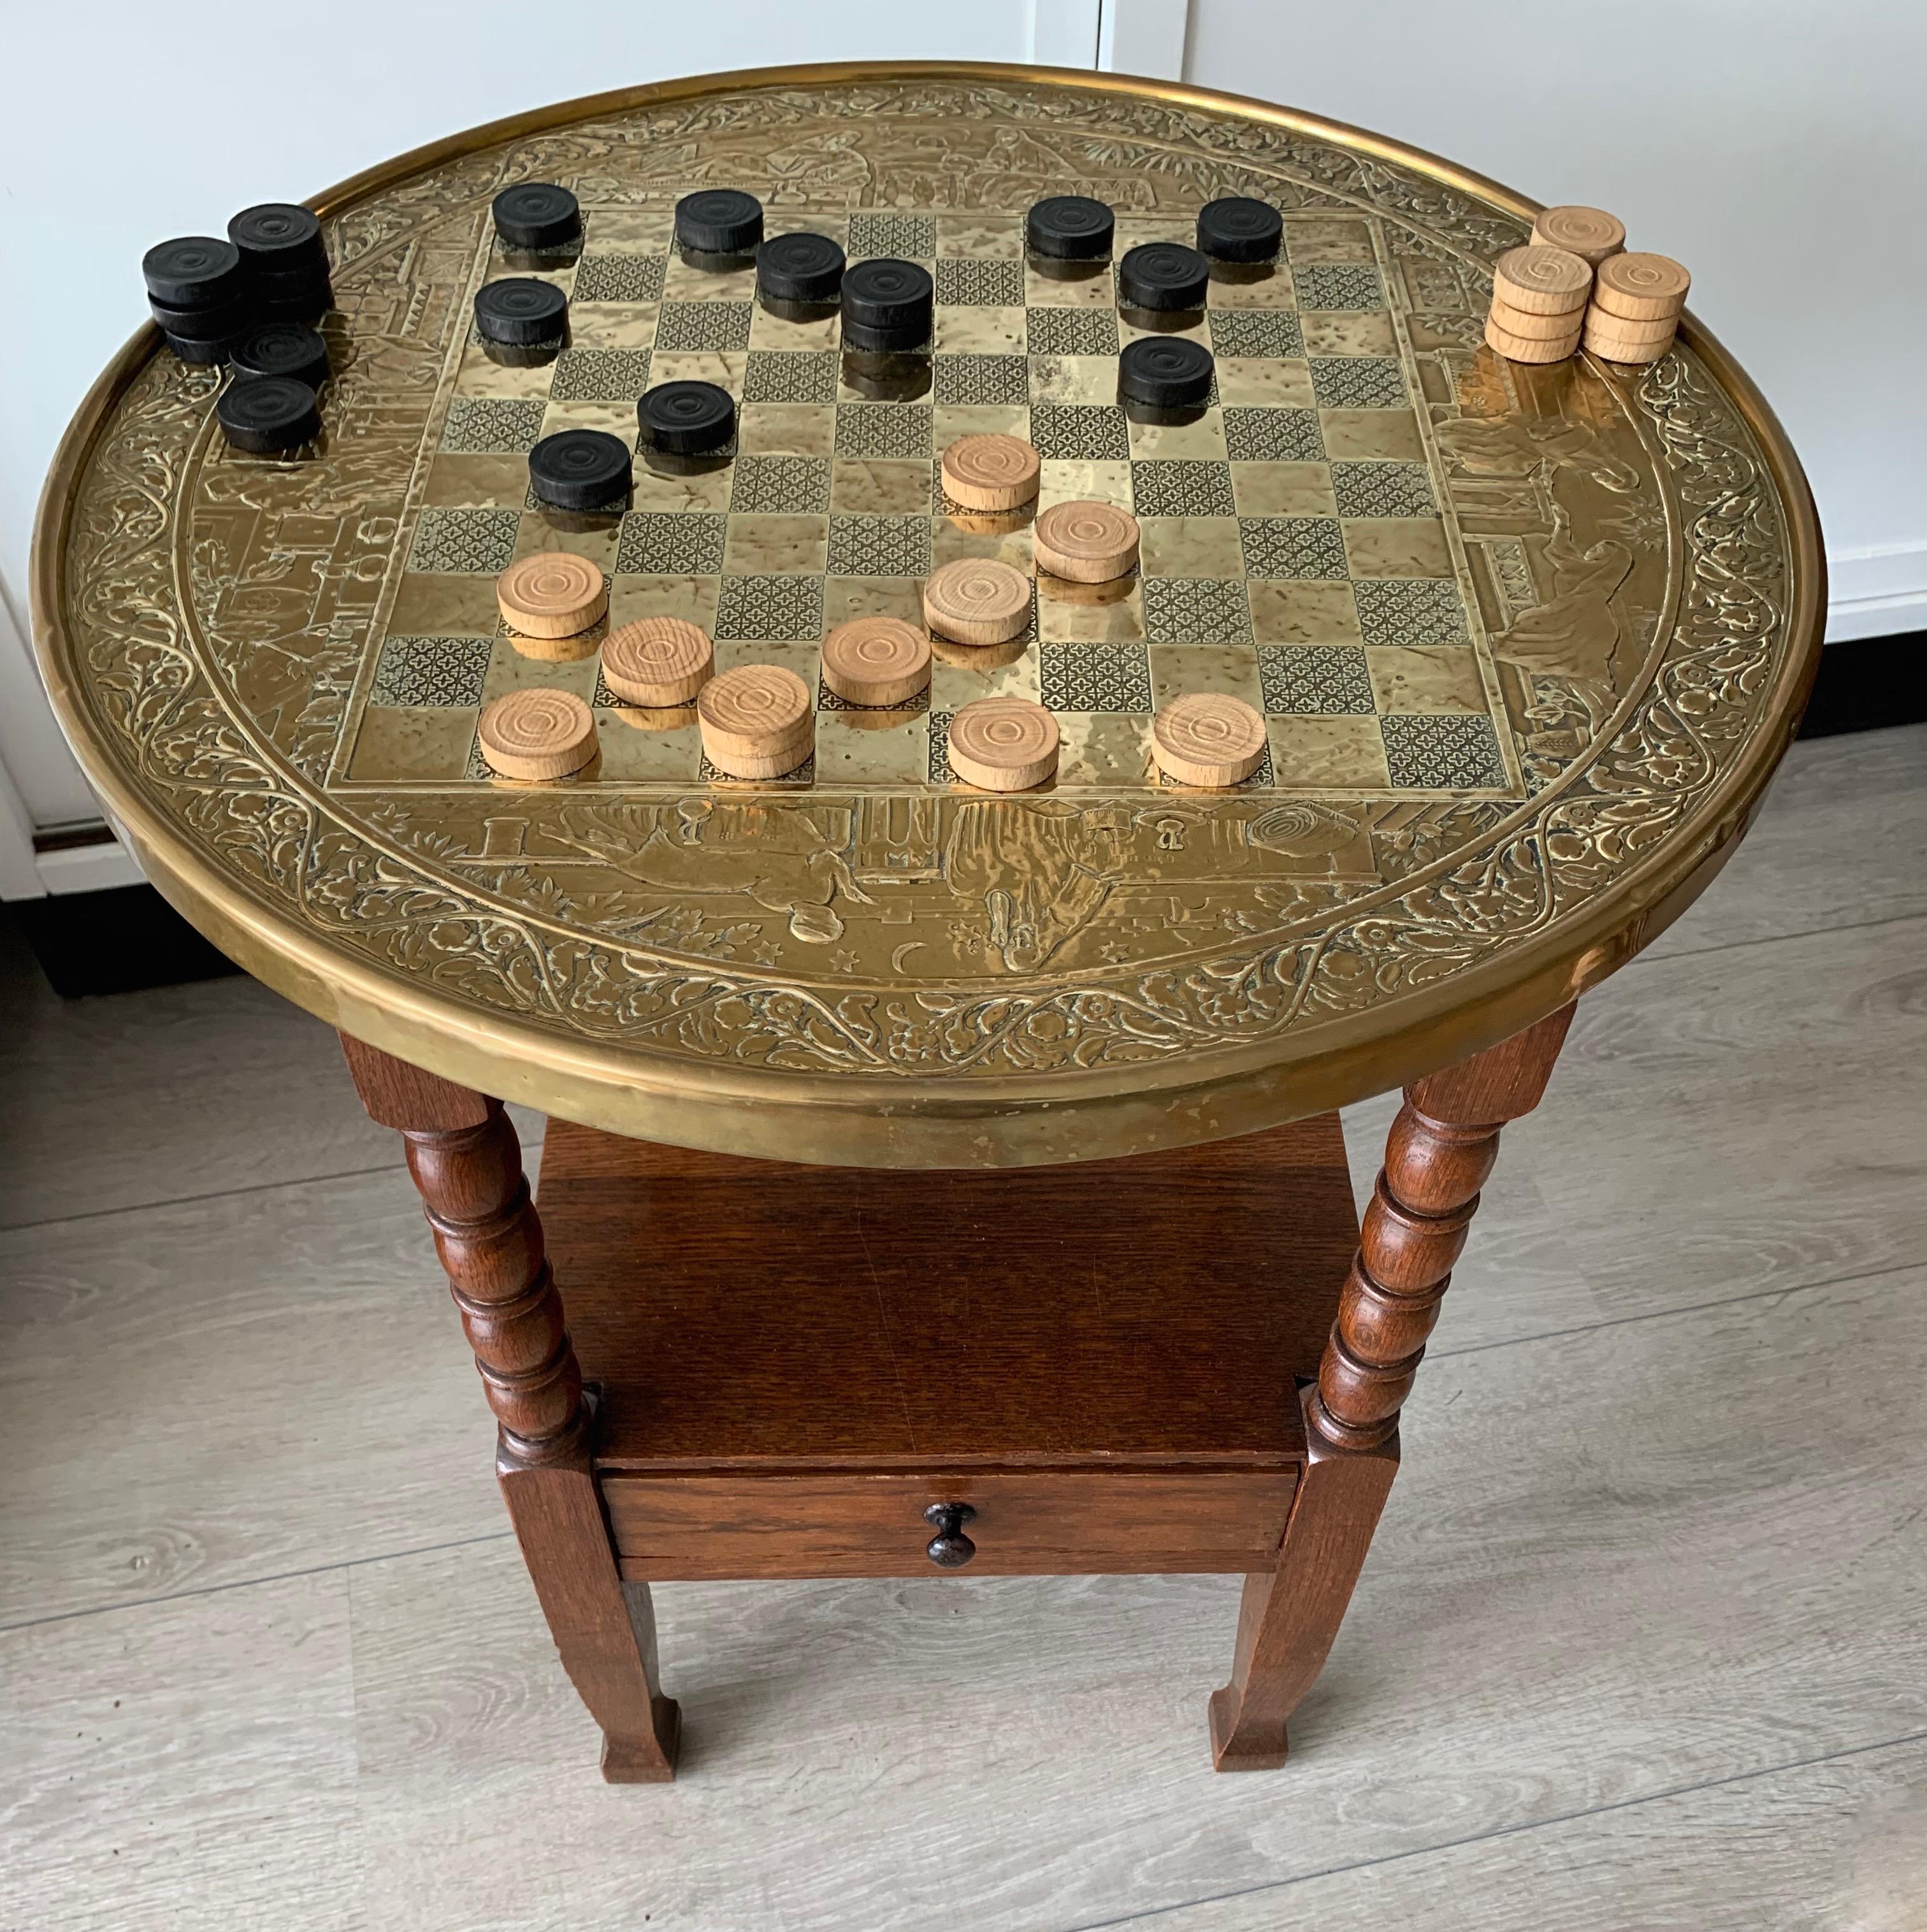 Antique and artistic Arts & Crafts checkers game table with a warm patina.

This striking games table is another one of our recent, great finds. Not only is this a rare antique checkers table, the handcrafted and embossed images of people from